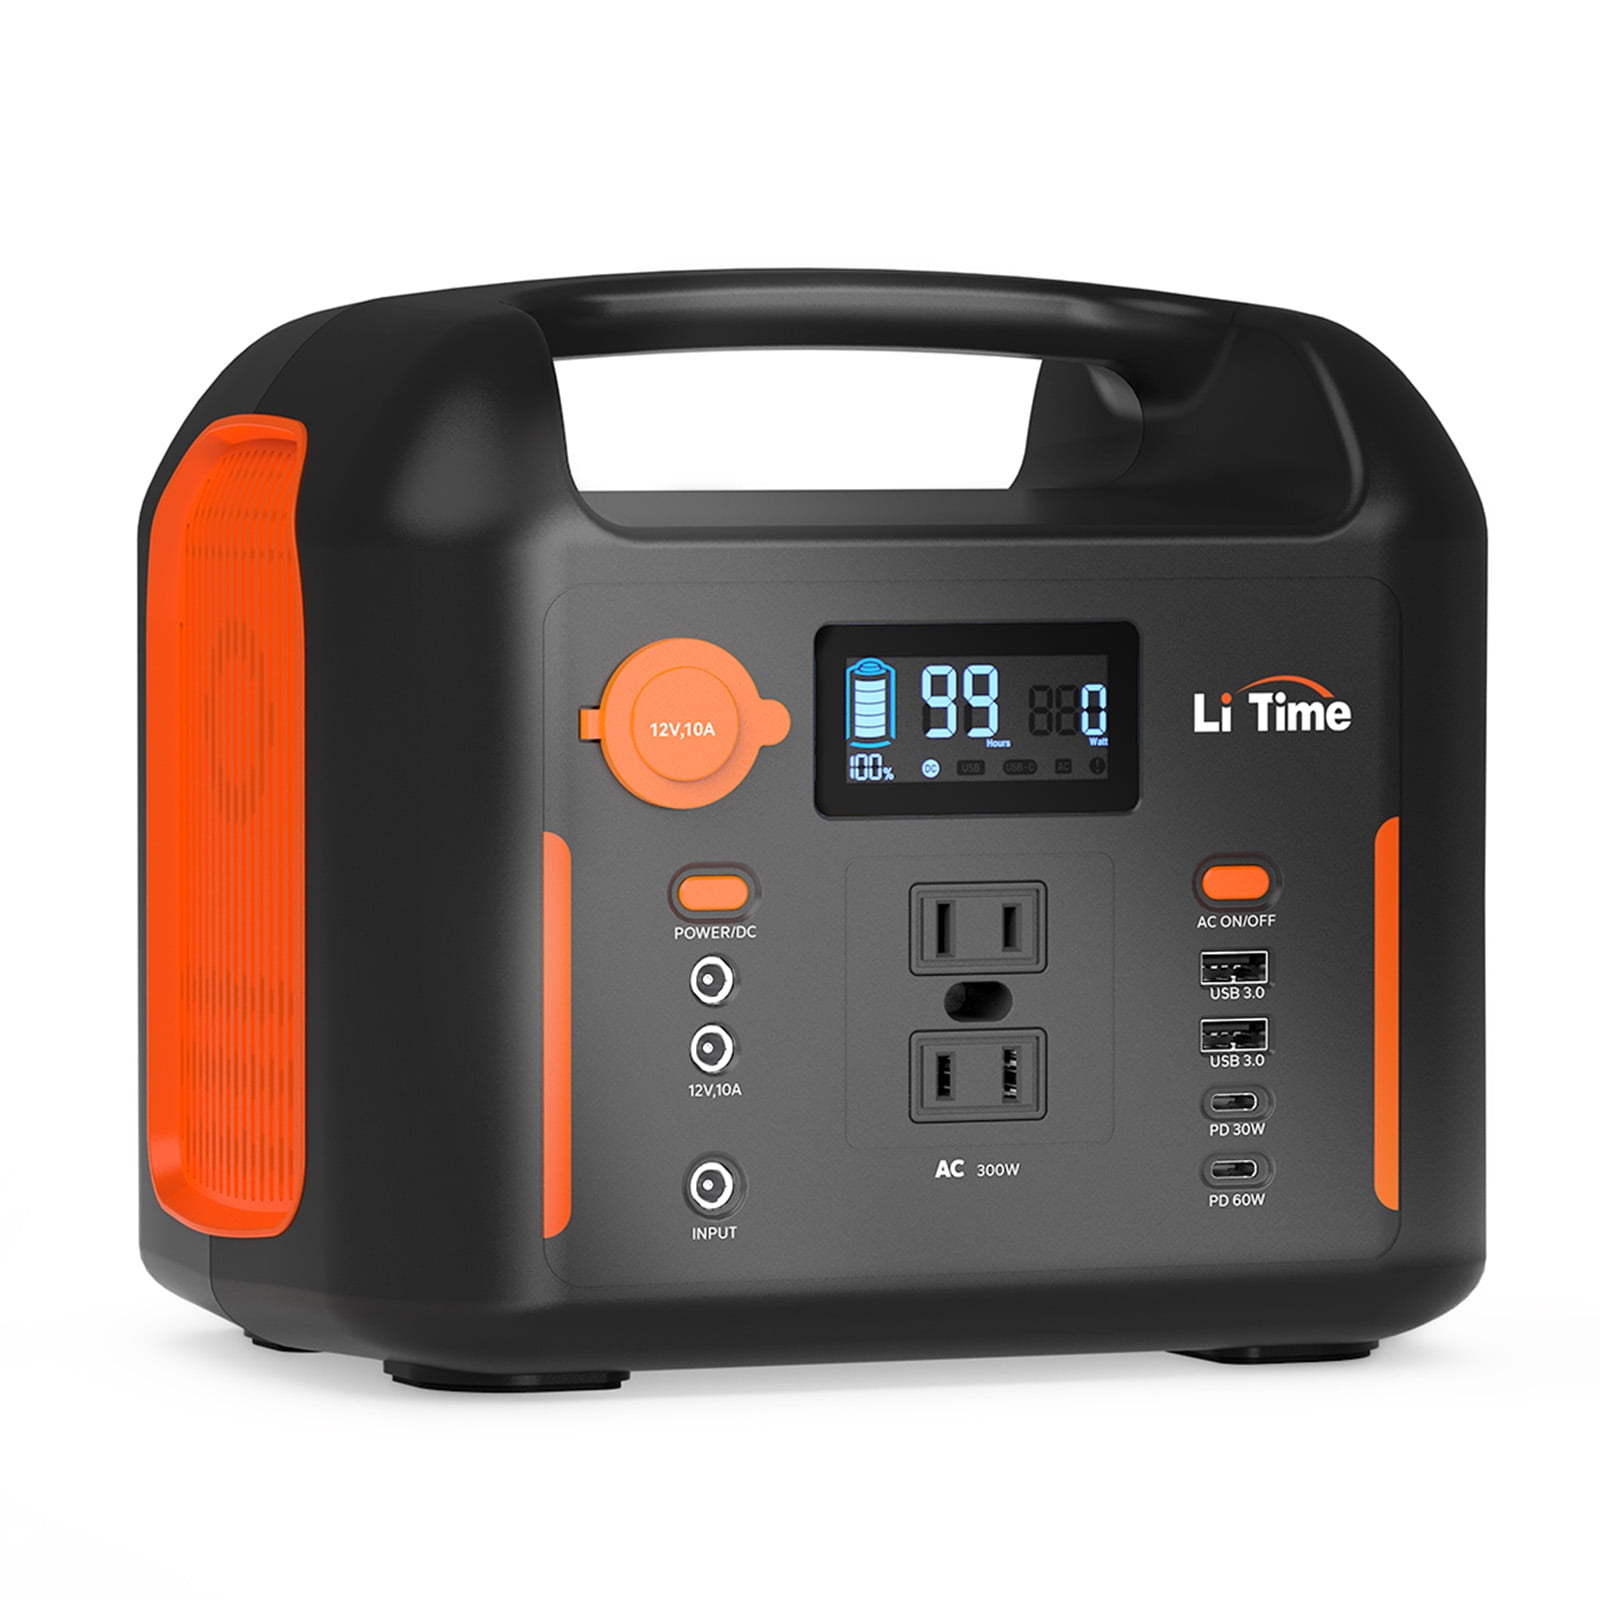 IDEAPLAY 2200W Portable Power Station - 2000Wh Solar Generator - with 6  110V/2200W AC Outlets